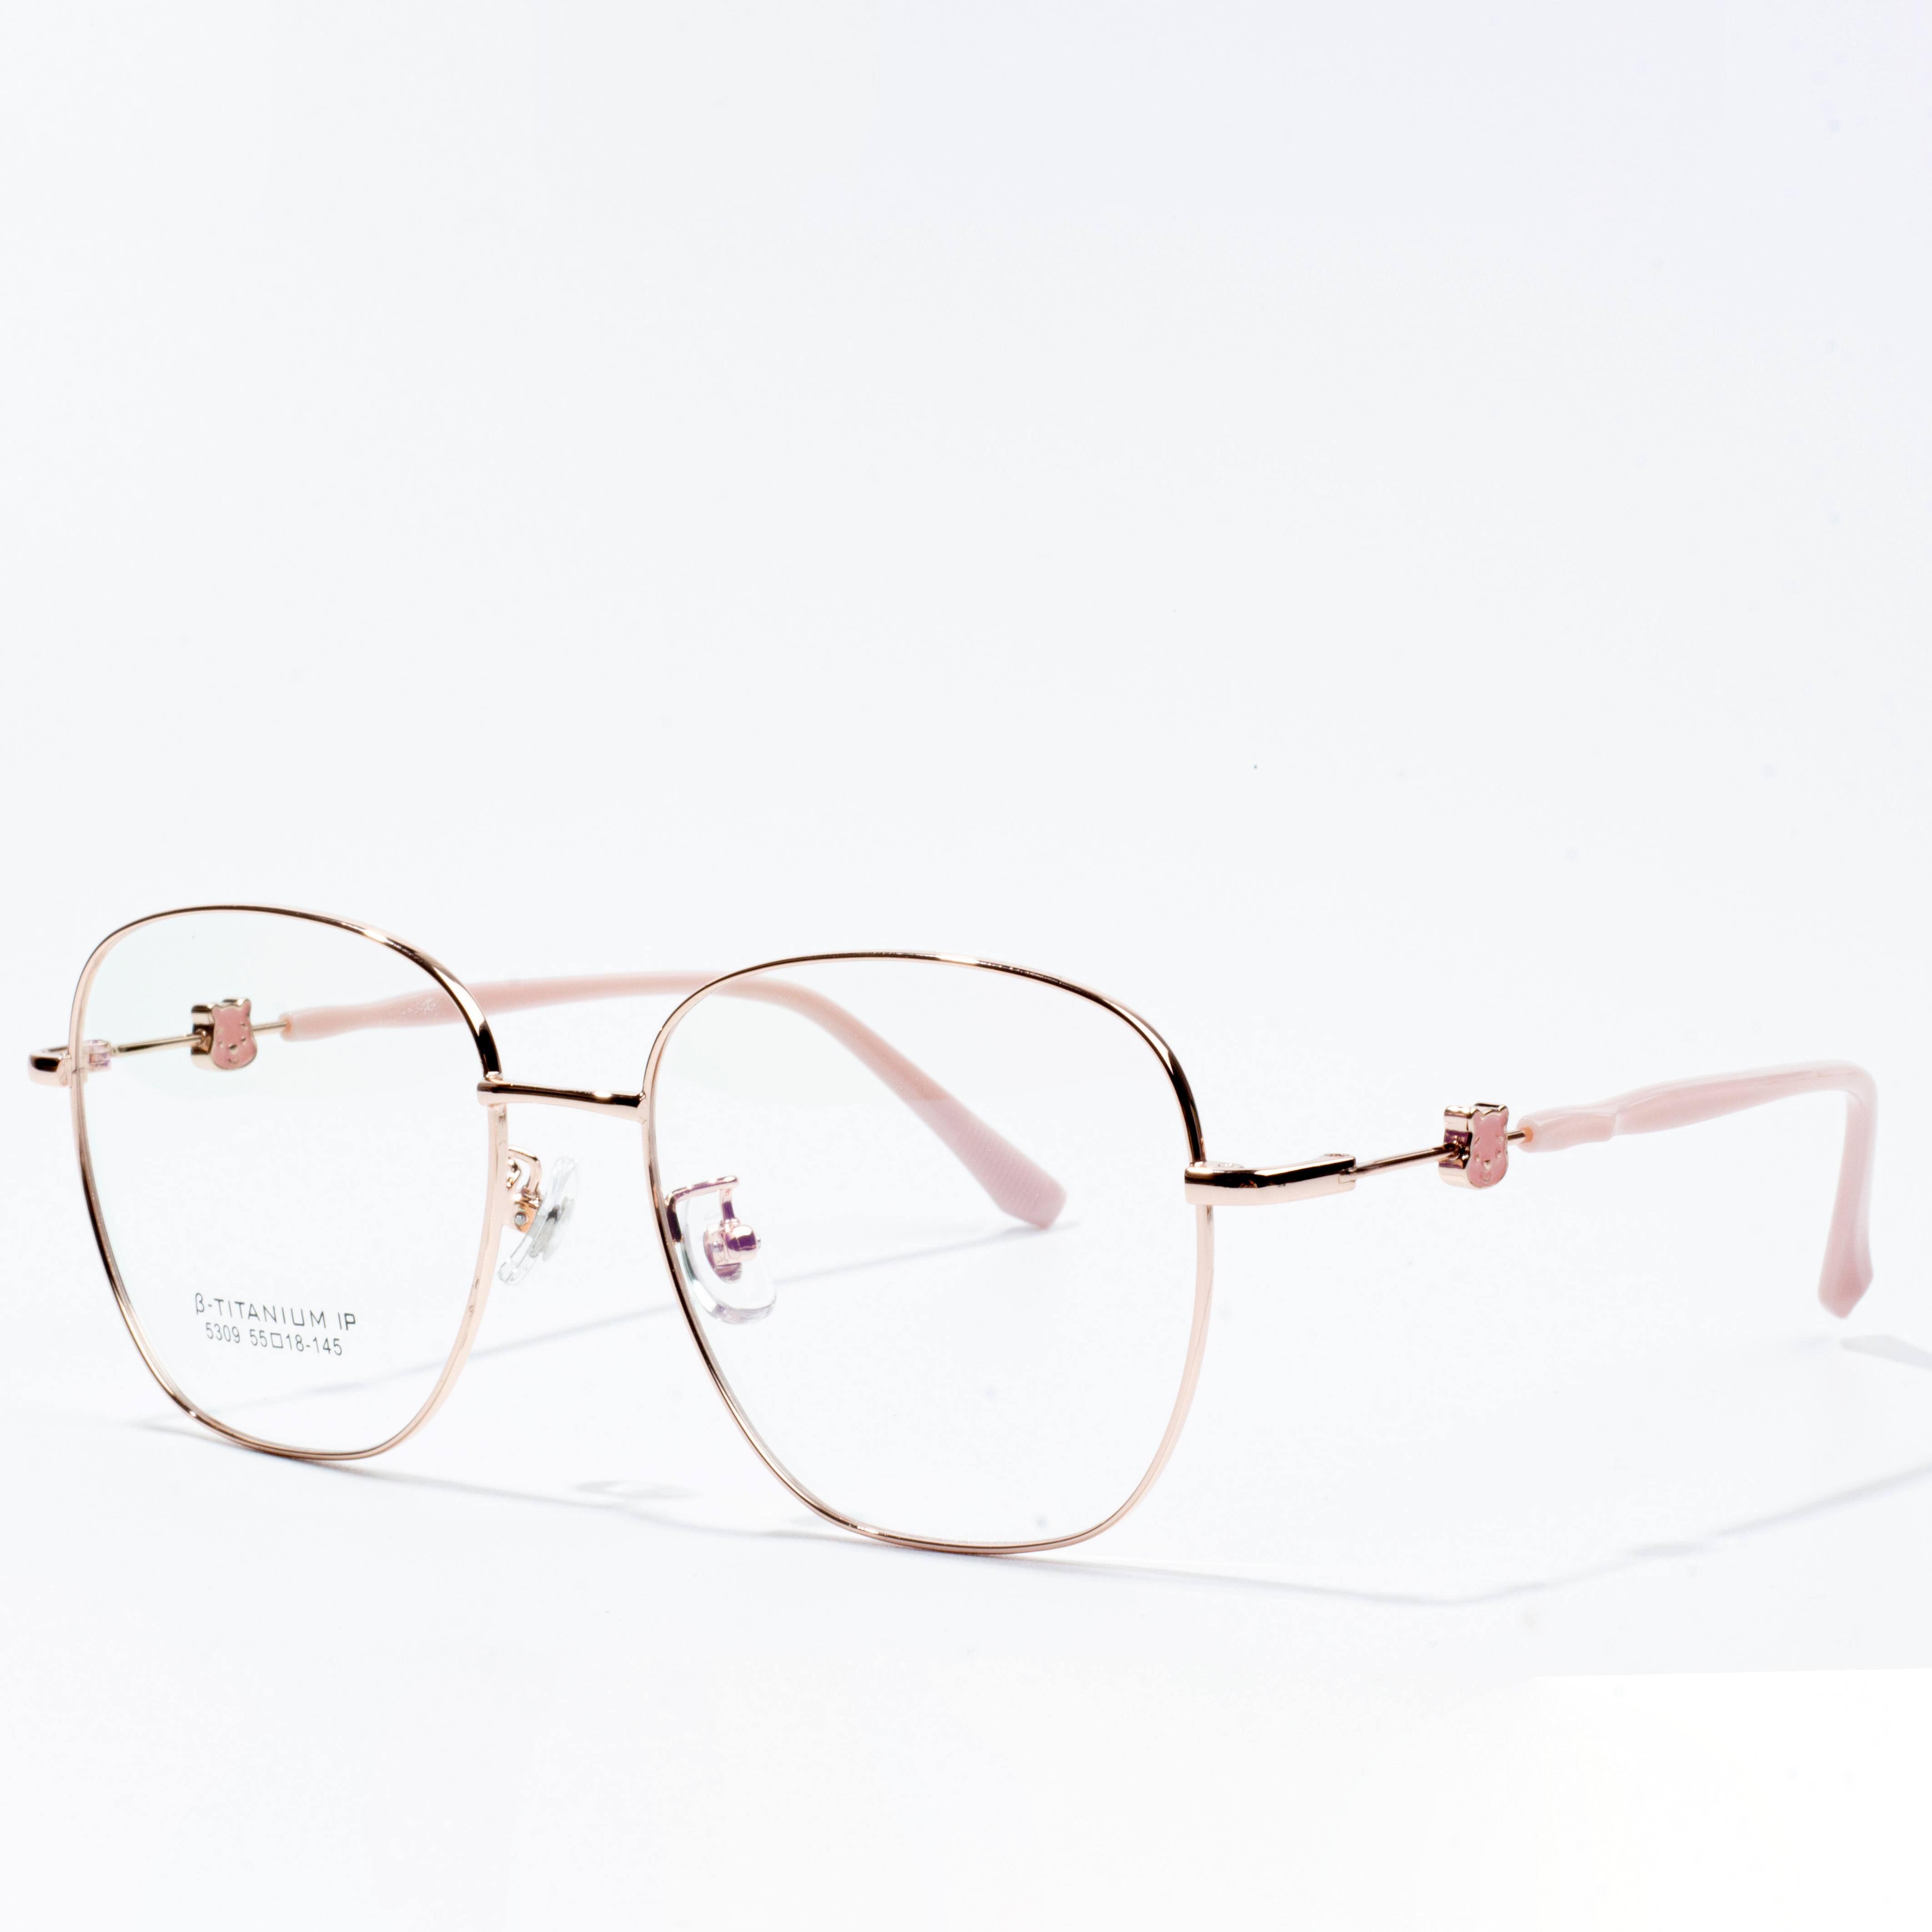 eyeglass frames are in style